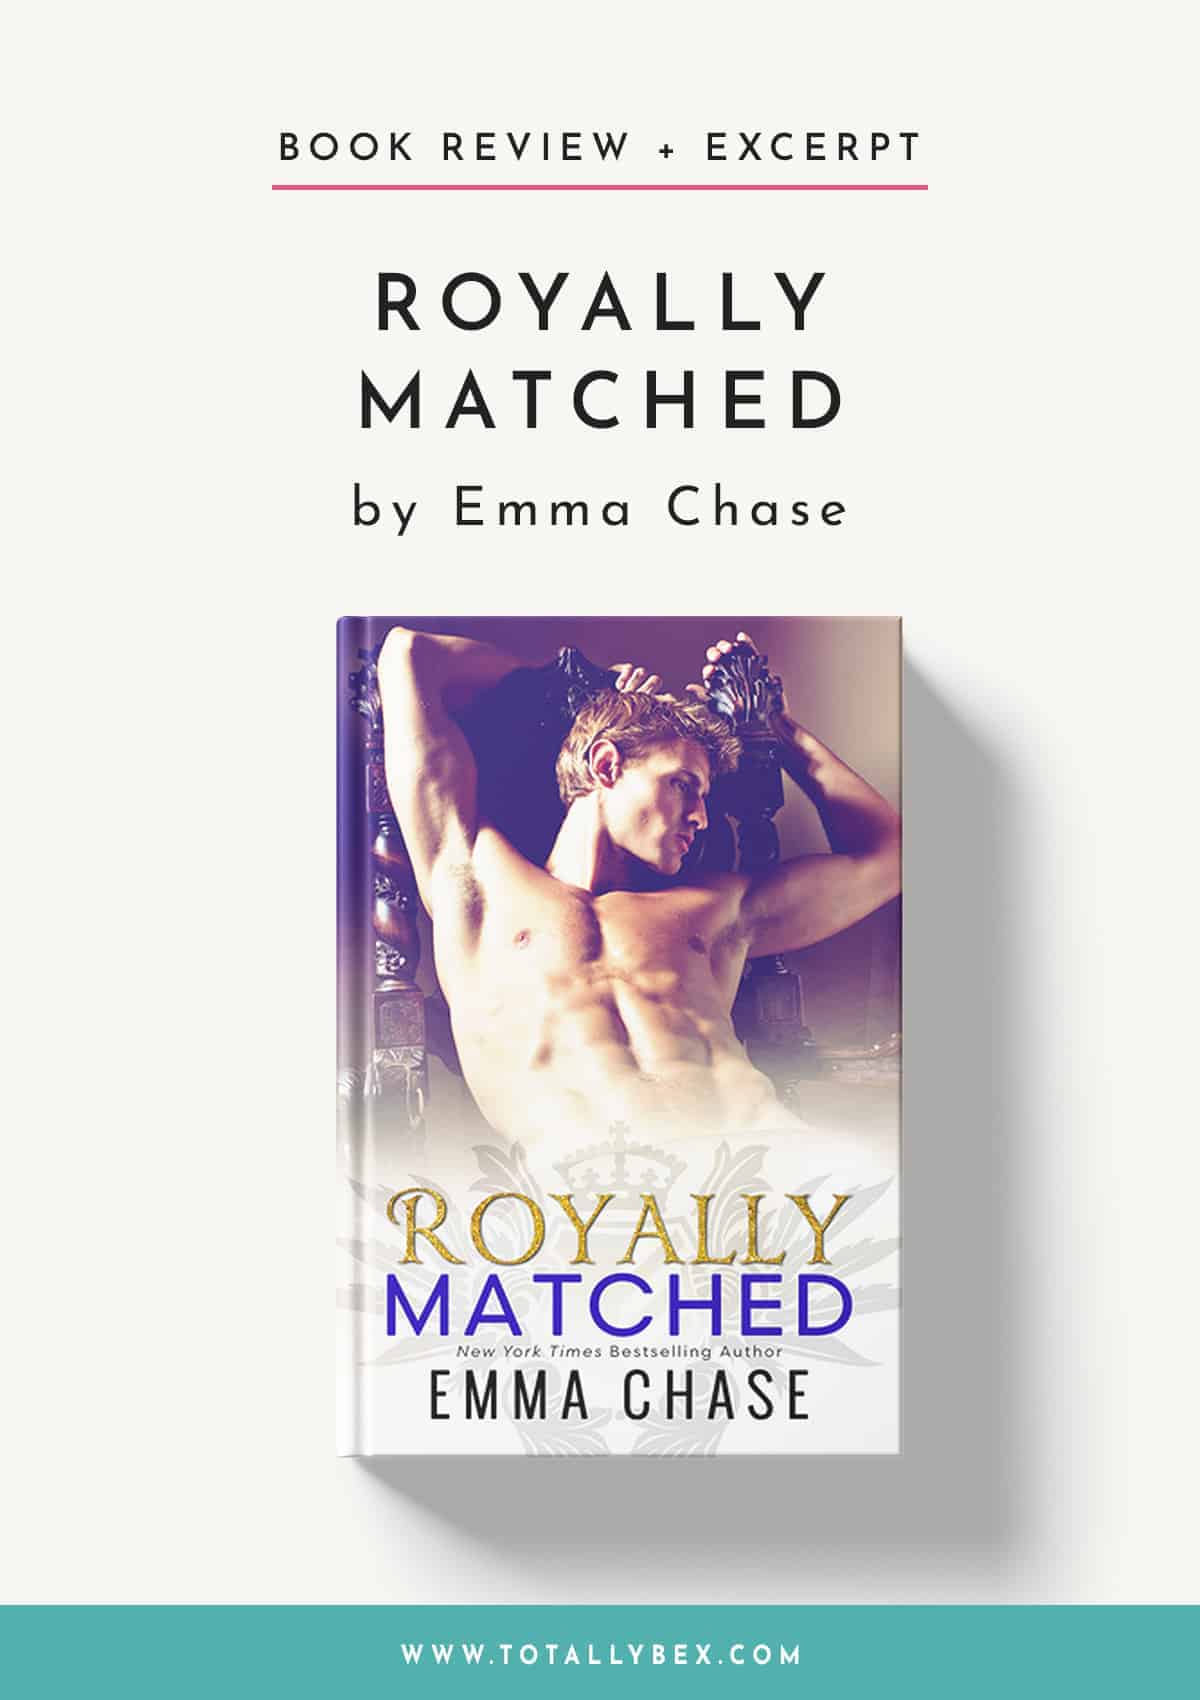 Royally Matched by Emma Chase – Royal Romance Perfection!